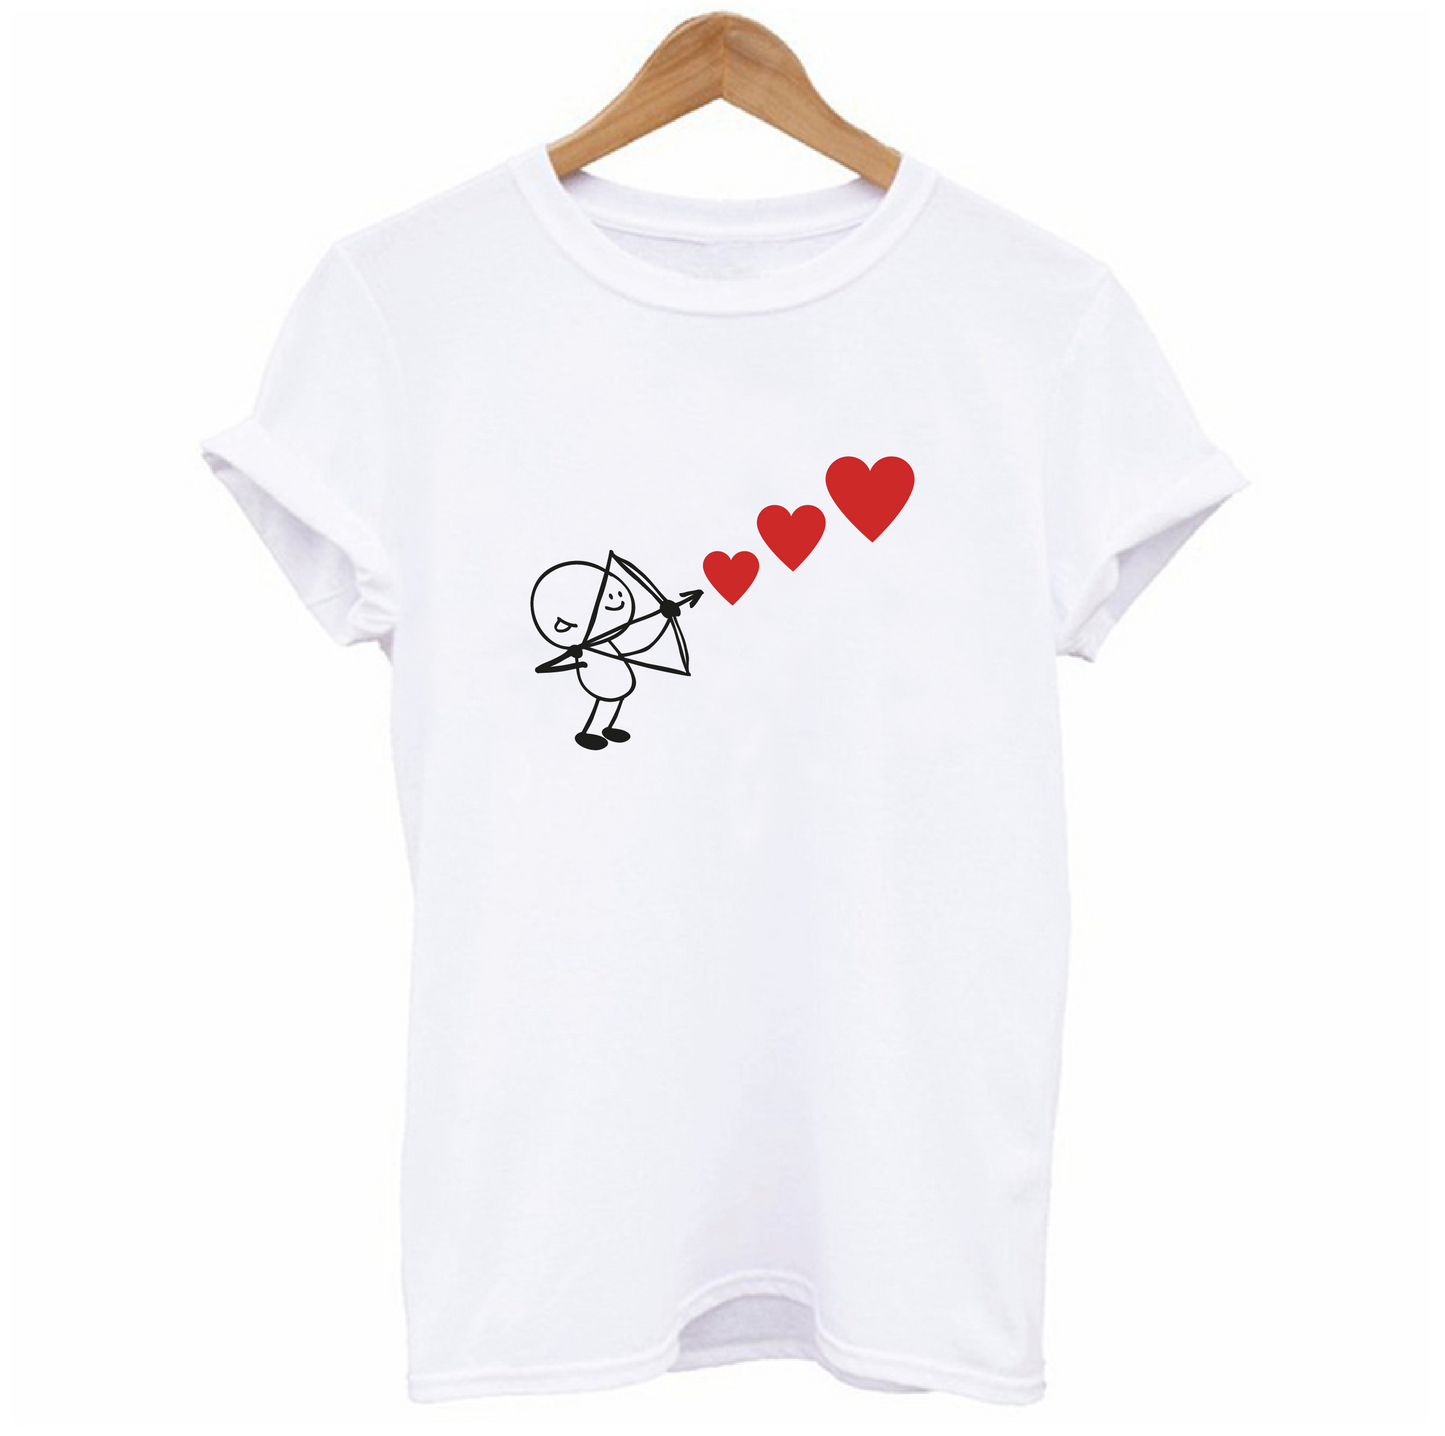 Cupid Shoots Red Hearts T-shirt